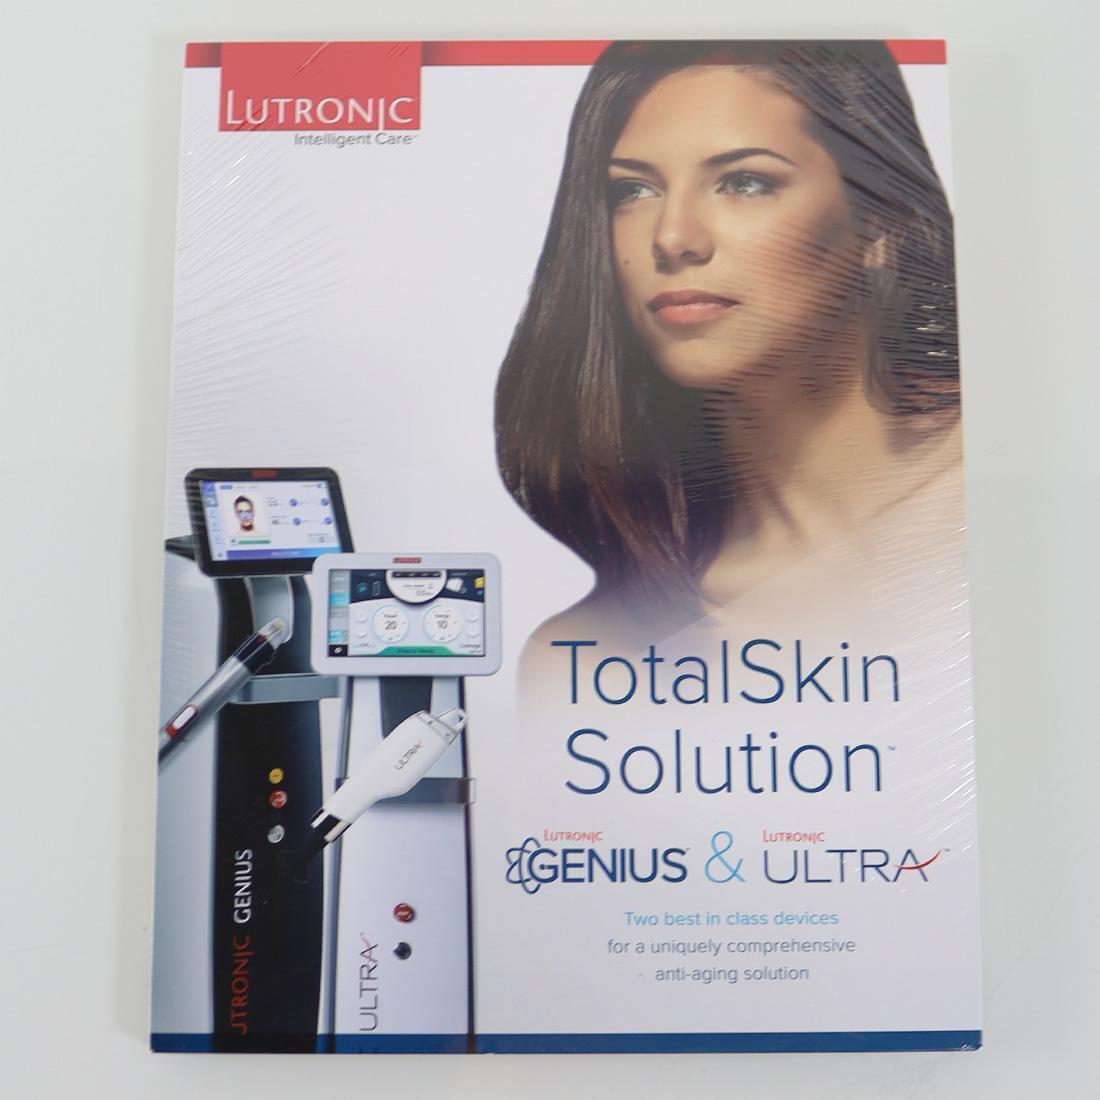 Lutronic Genius Ultra RadioFrequency Anti-Aging Patient Marketing Brochure x25Pc